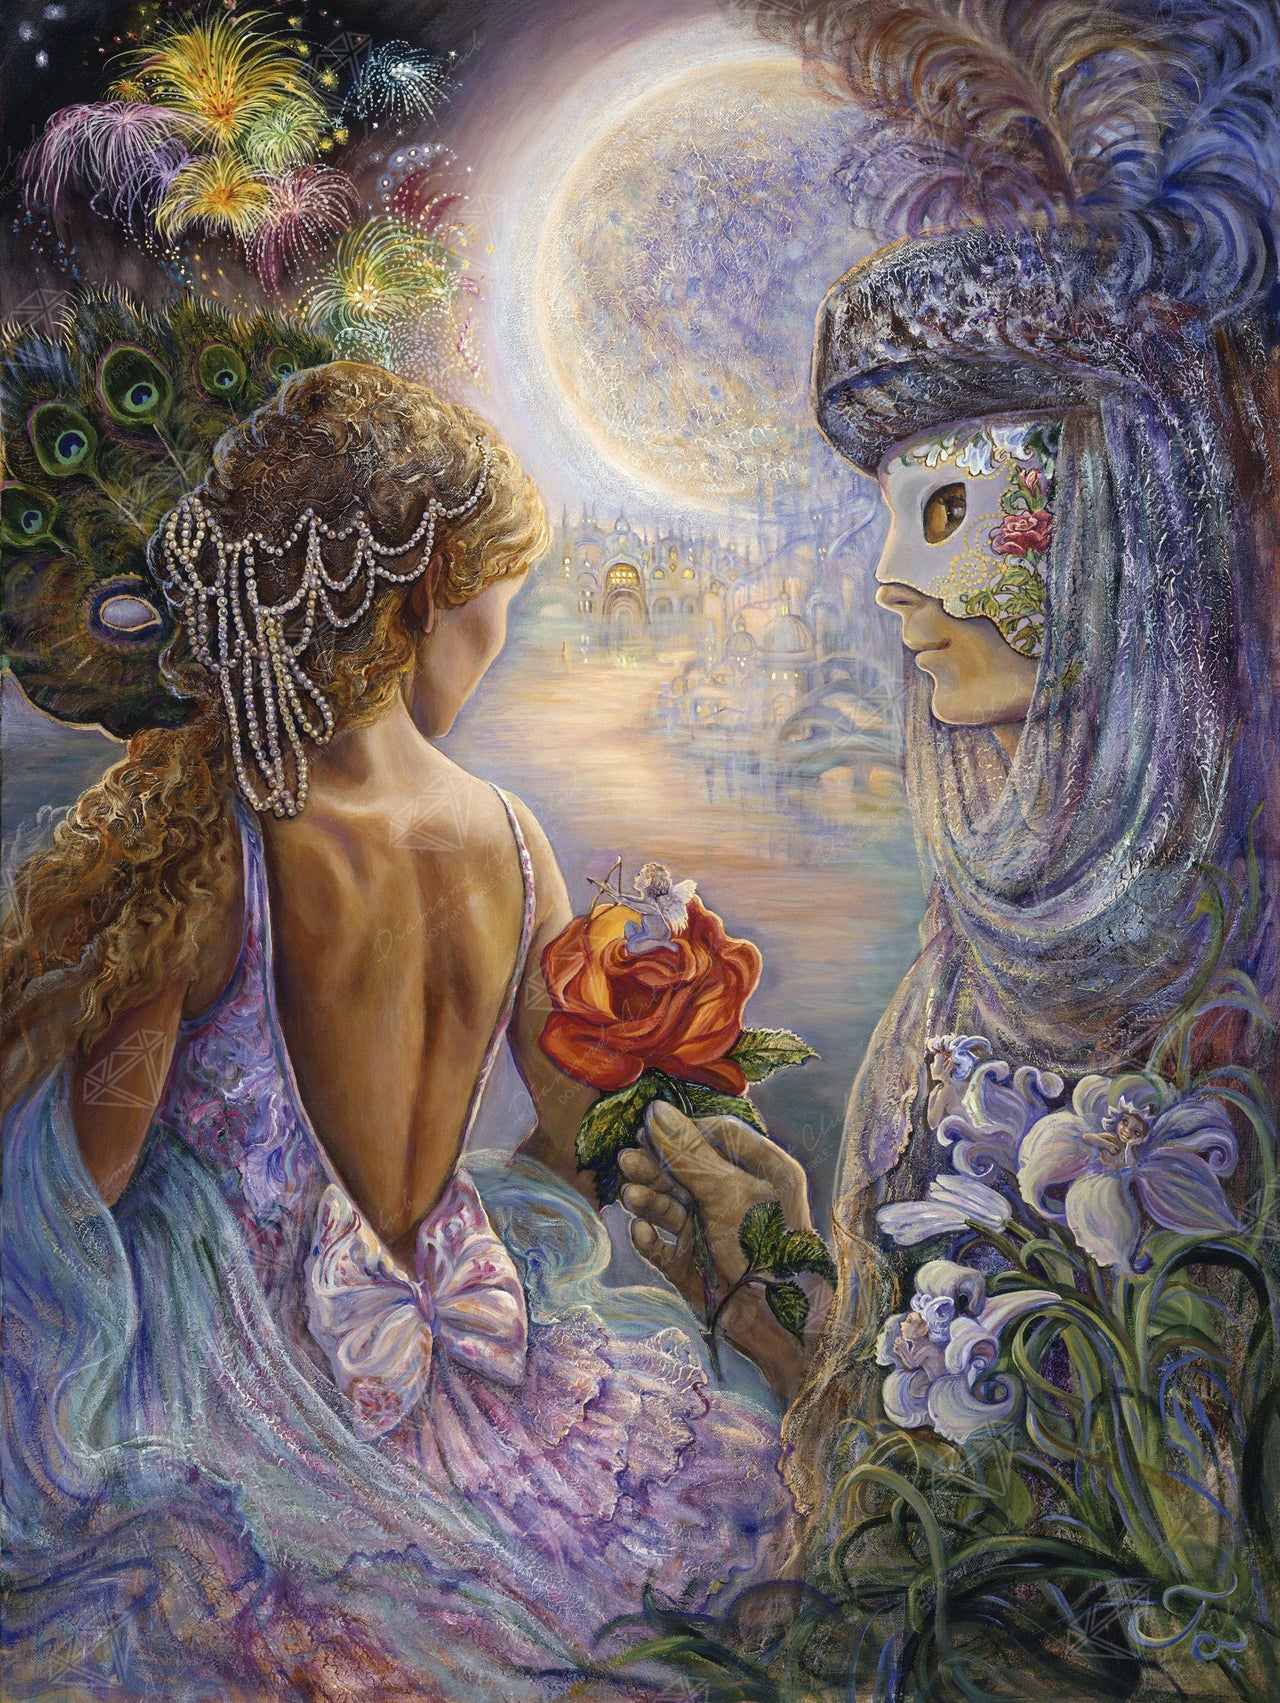 Diamond Painting Masque of Love 27.6" x 36.6″ (70cm x 93cm) / Square with 58 Colors including 3 ABs